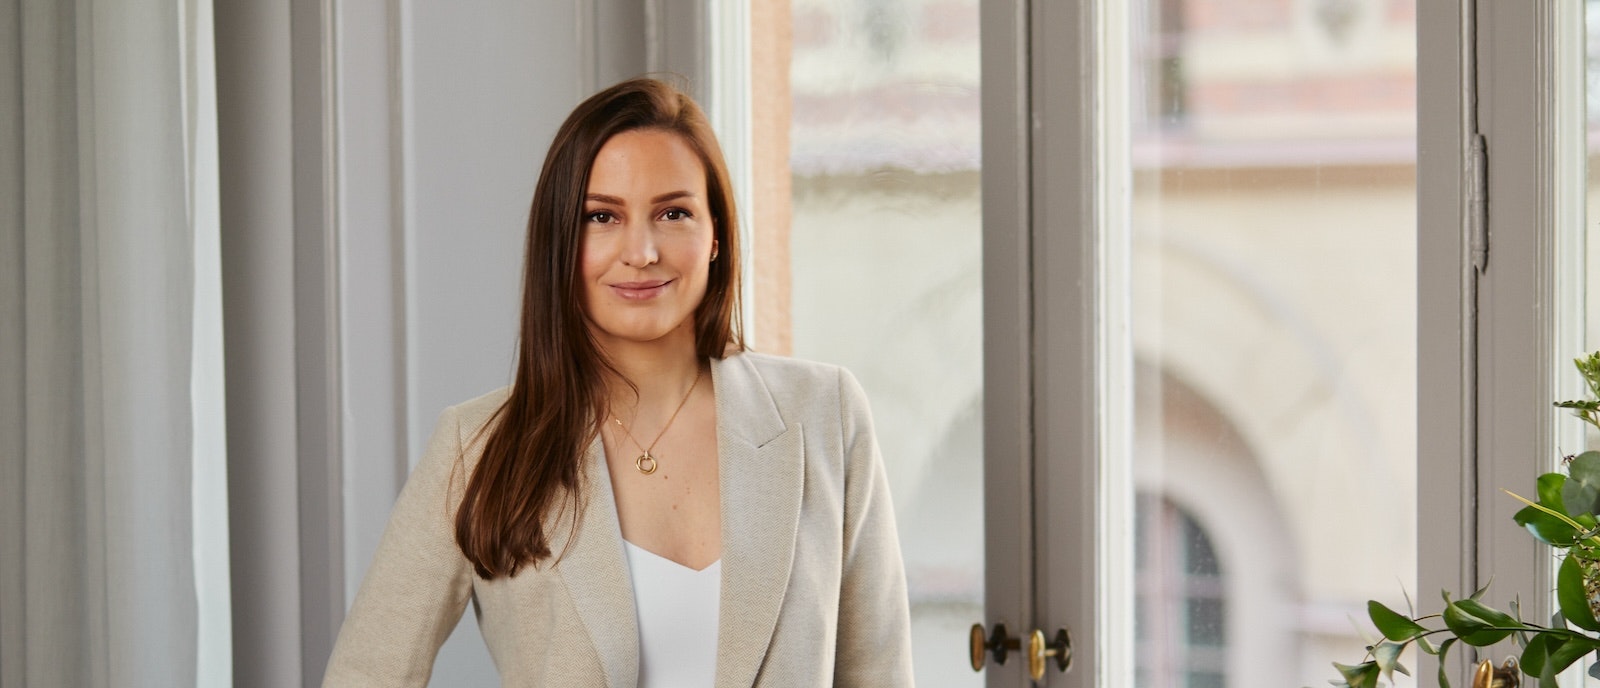 Picture of Lena Hackelöer, CEO and founder of Brite Payments